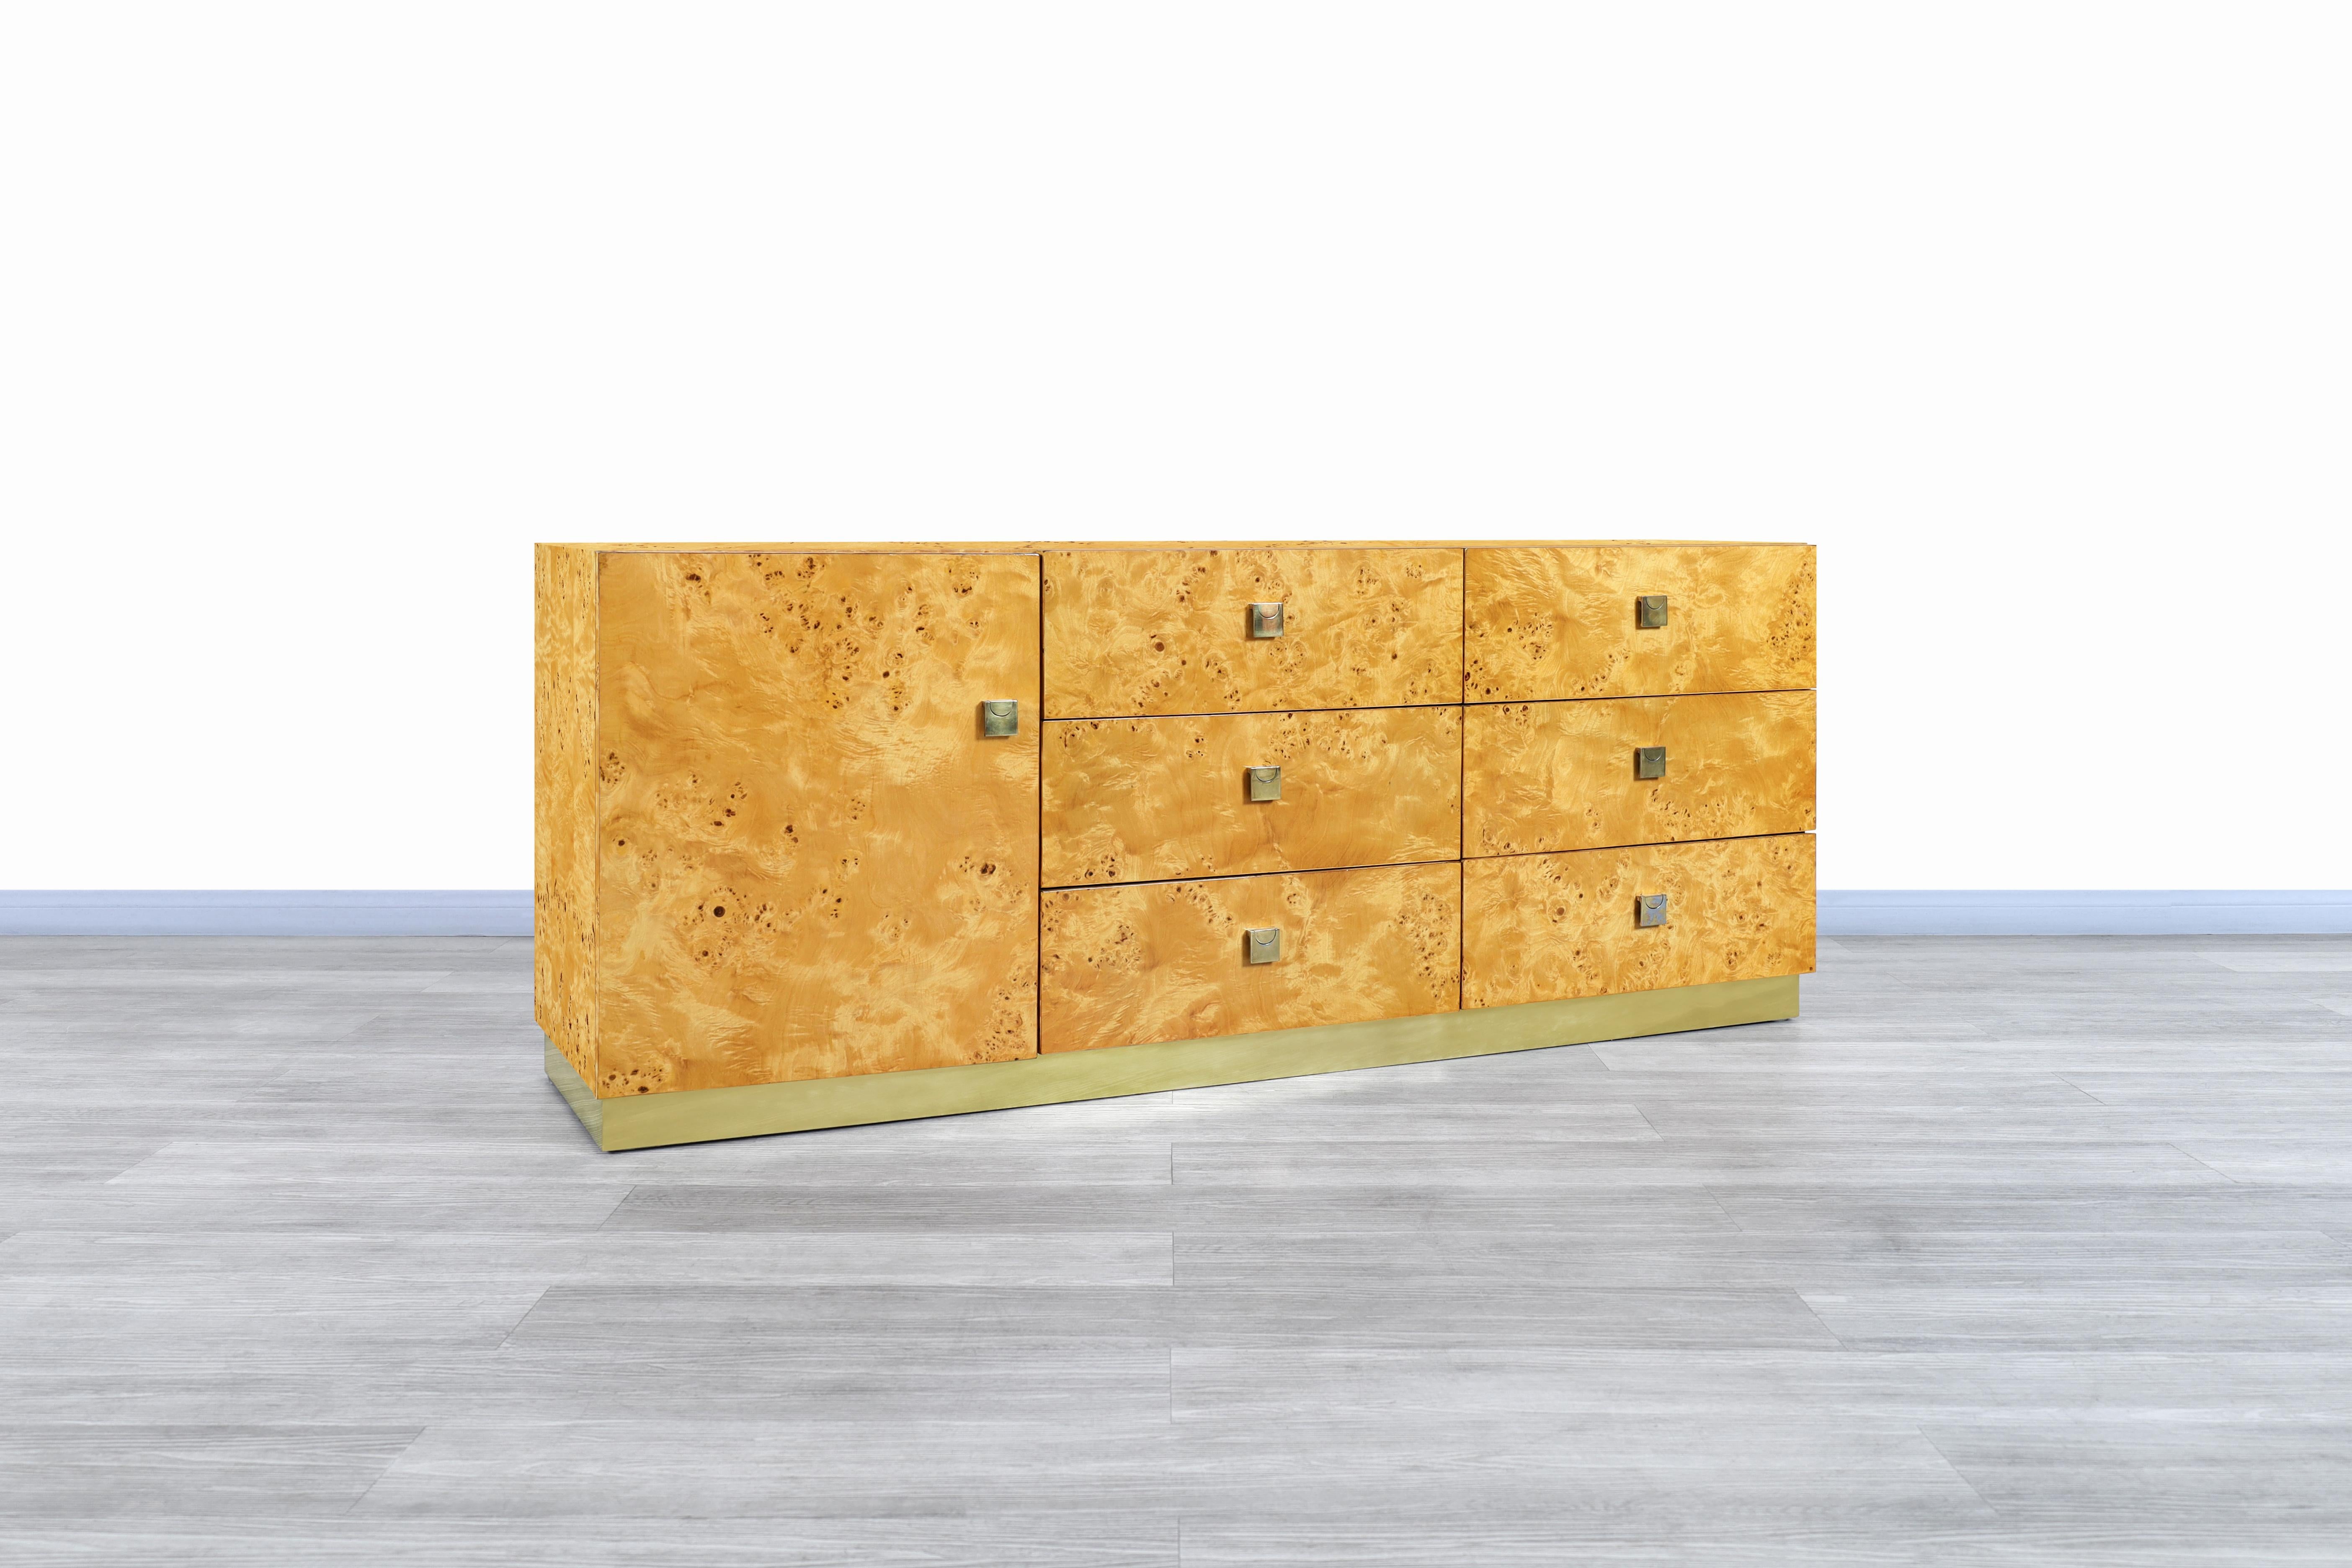 Gorgeous vintage burl wood and brass credenza manufactured by Founders in the United States, circa 1980s. This credenza is inspired by the iconic designs of the famous designer Milo Baughman. This collection was characterized by having fine